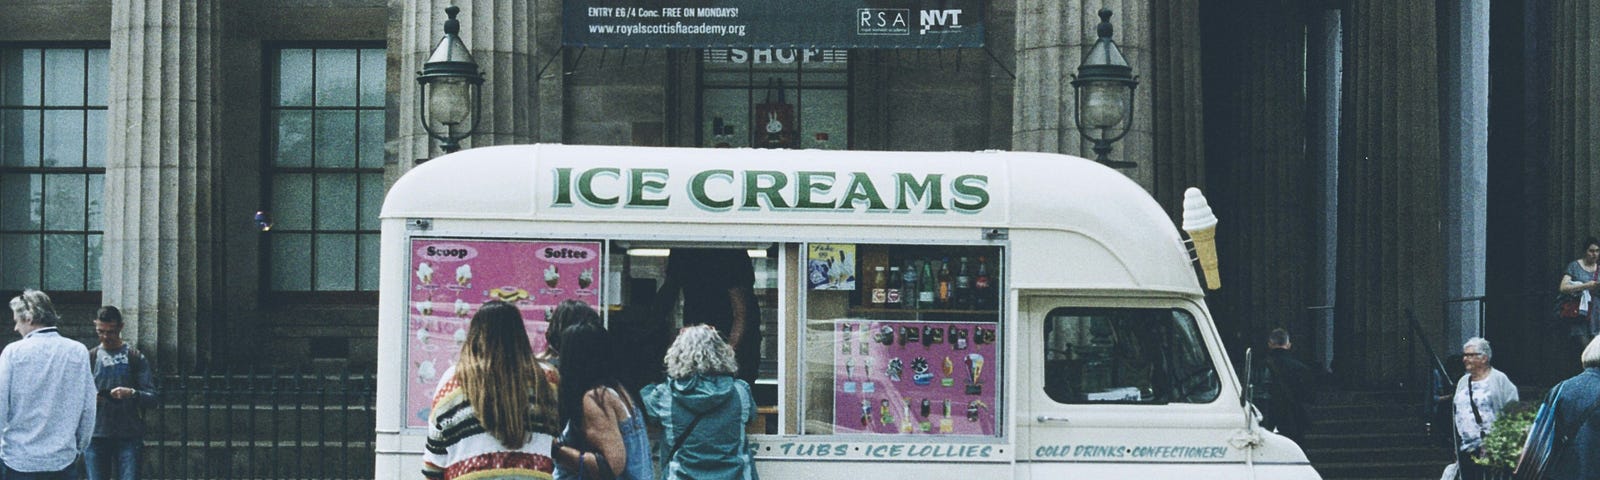 a tiny icecream van, with a line up of people waiting